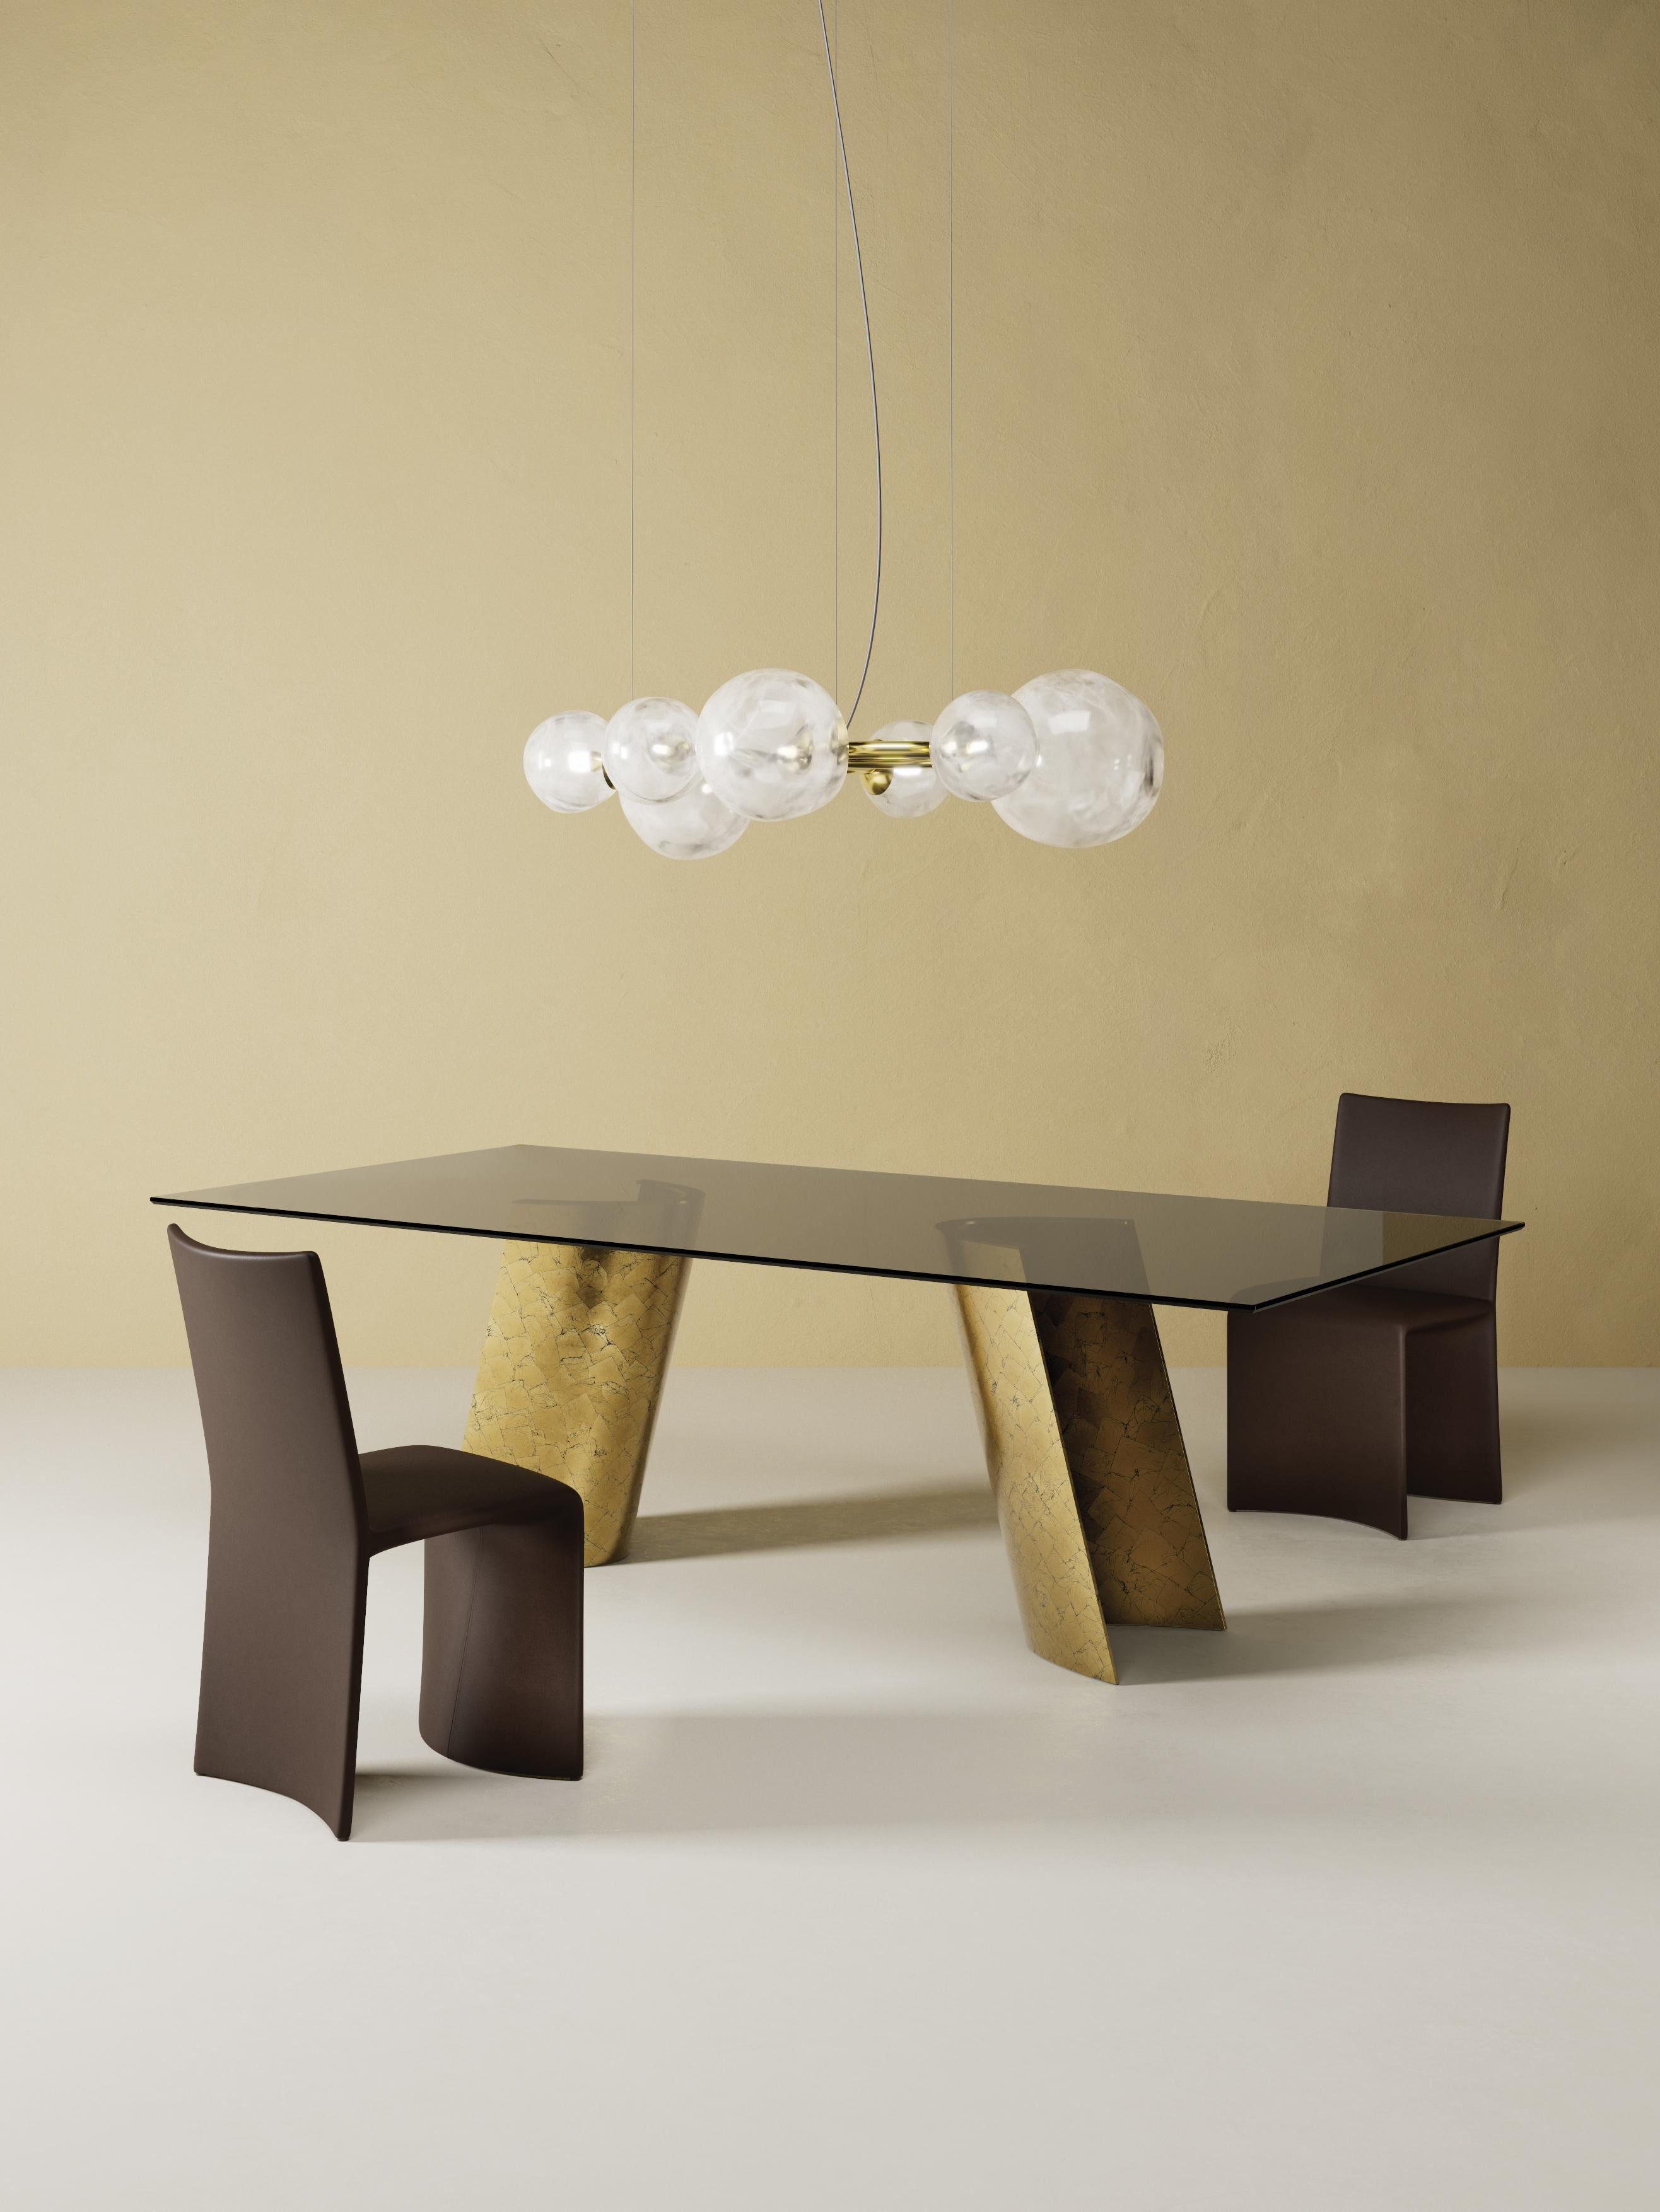 Efesto Dining Table by Chinellato Design
Dimensions: W 250 x D 120 x H 72 cm
Materials:
Top: Smooth Bronze Tempered Glass top.
Base: Gold 1 Large Pieces with Black Background finish.

Who better than the industrious god, a skilled craftsman, knows